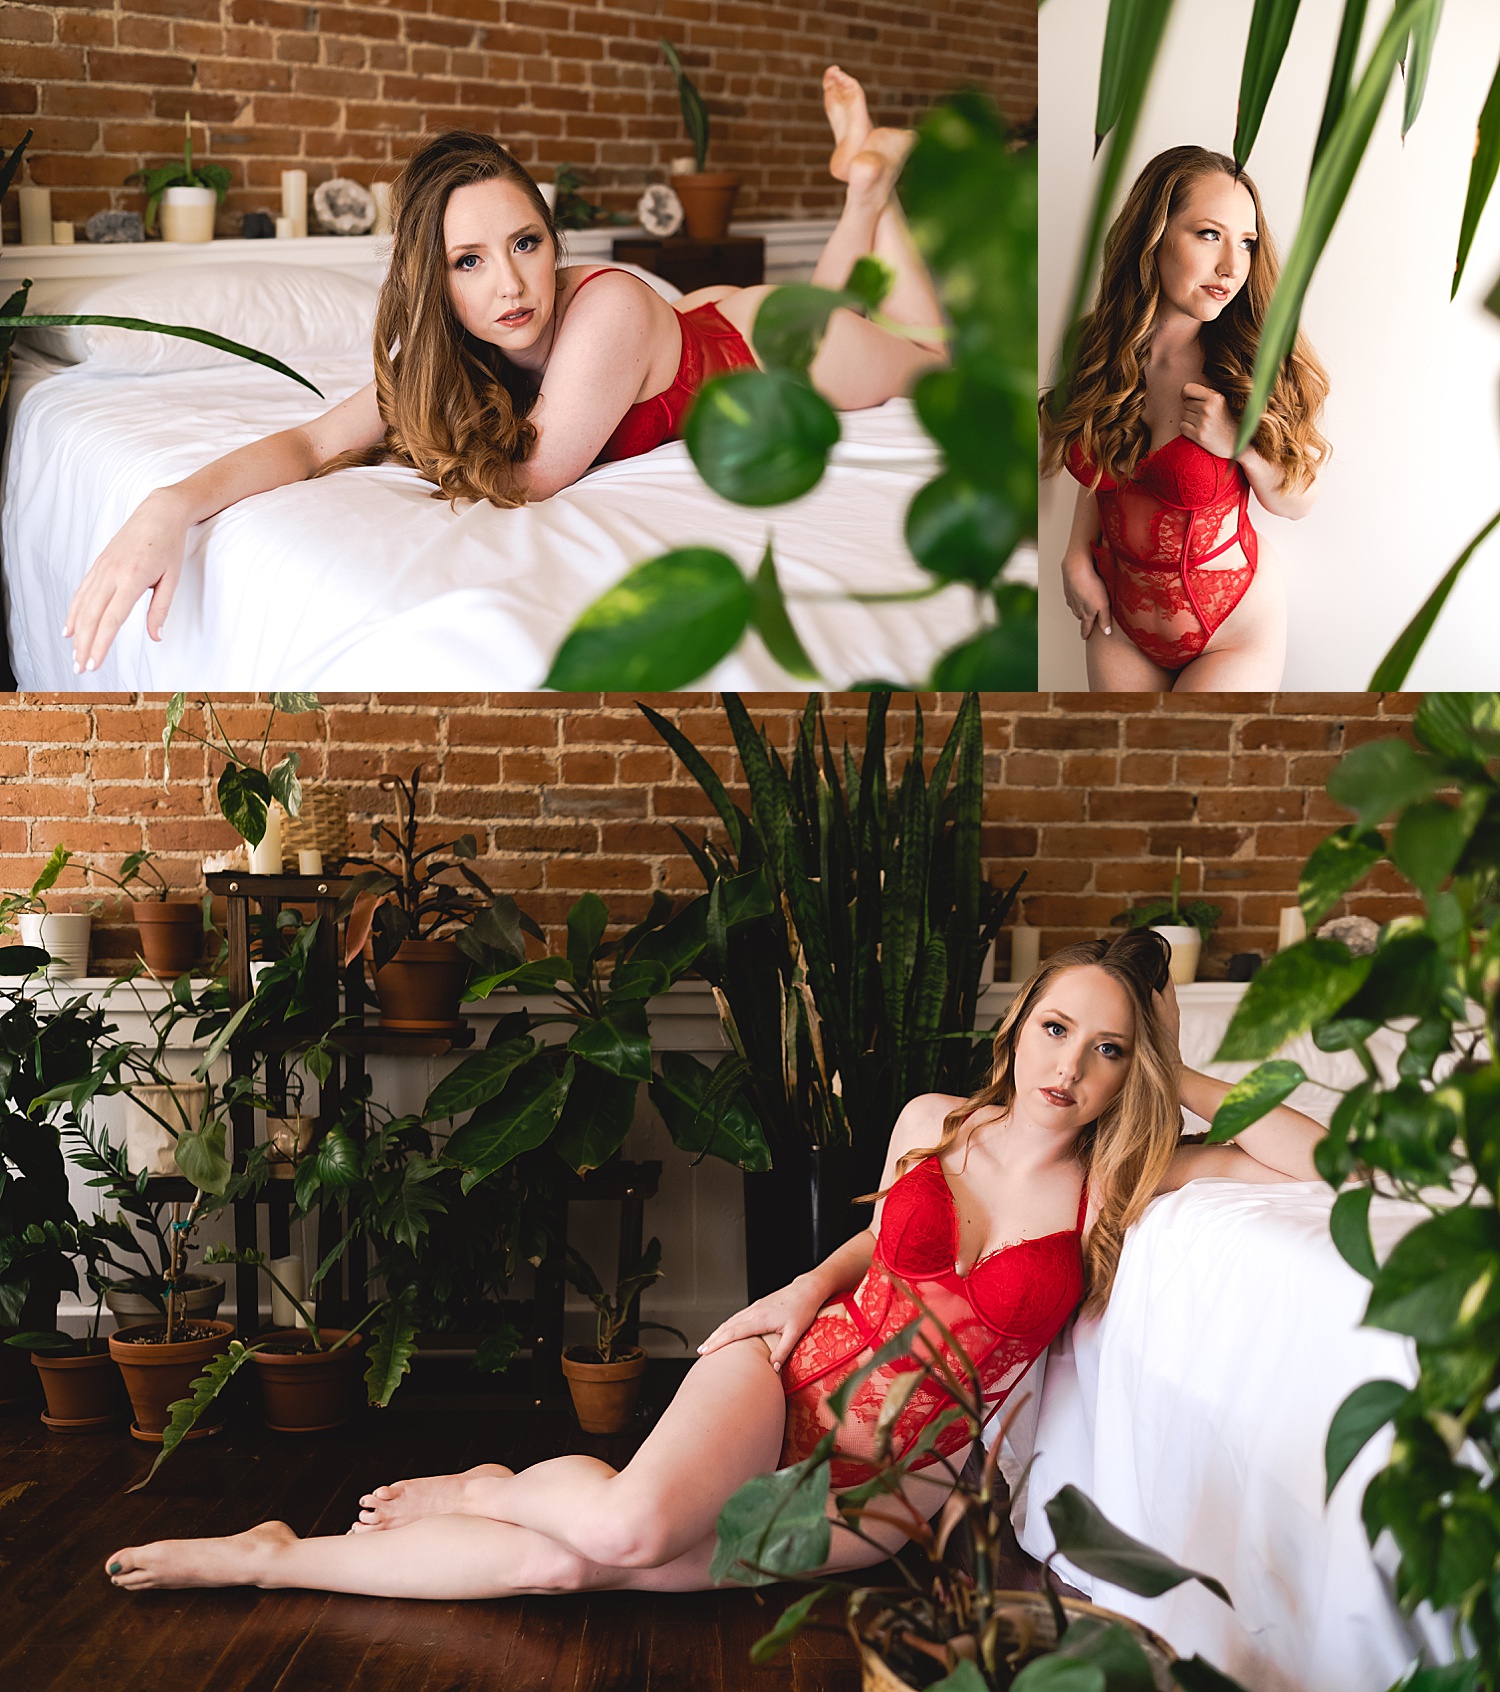 gift for military spouse session wearing lace red body suit on bed